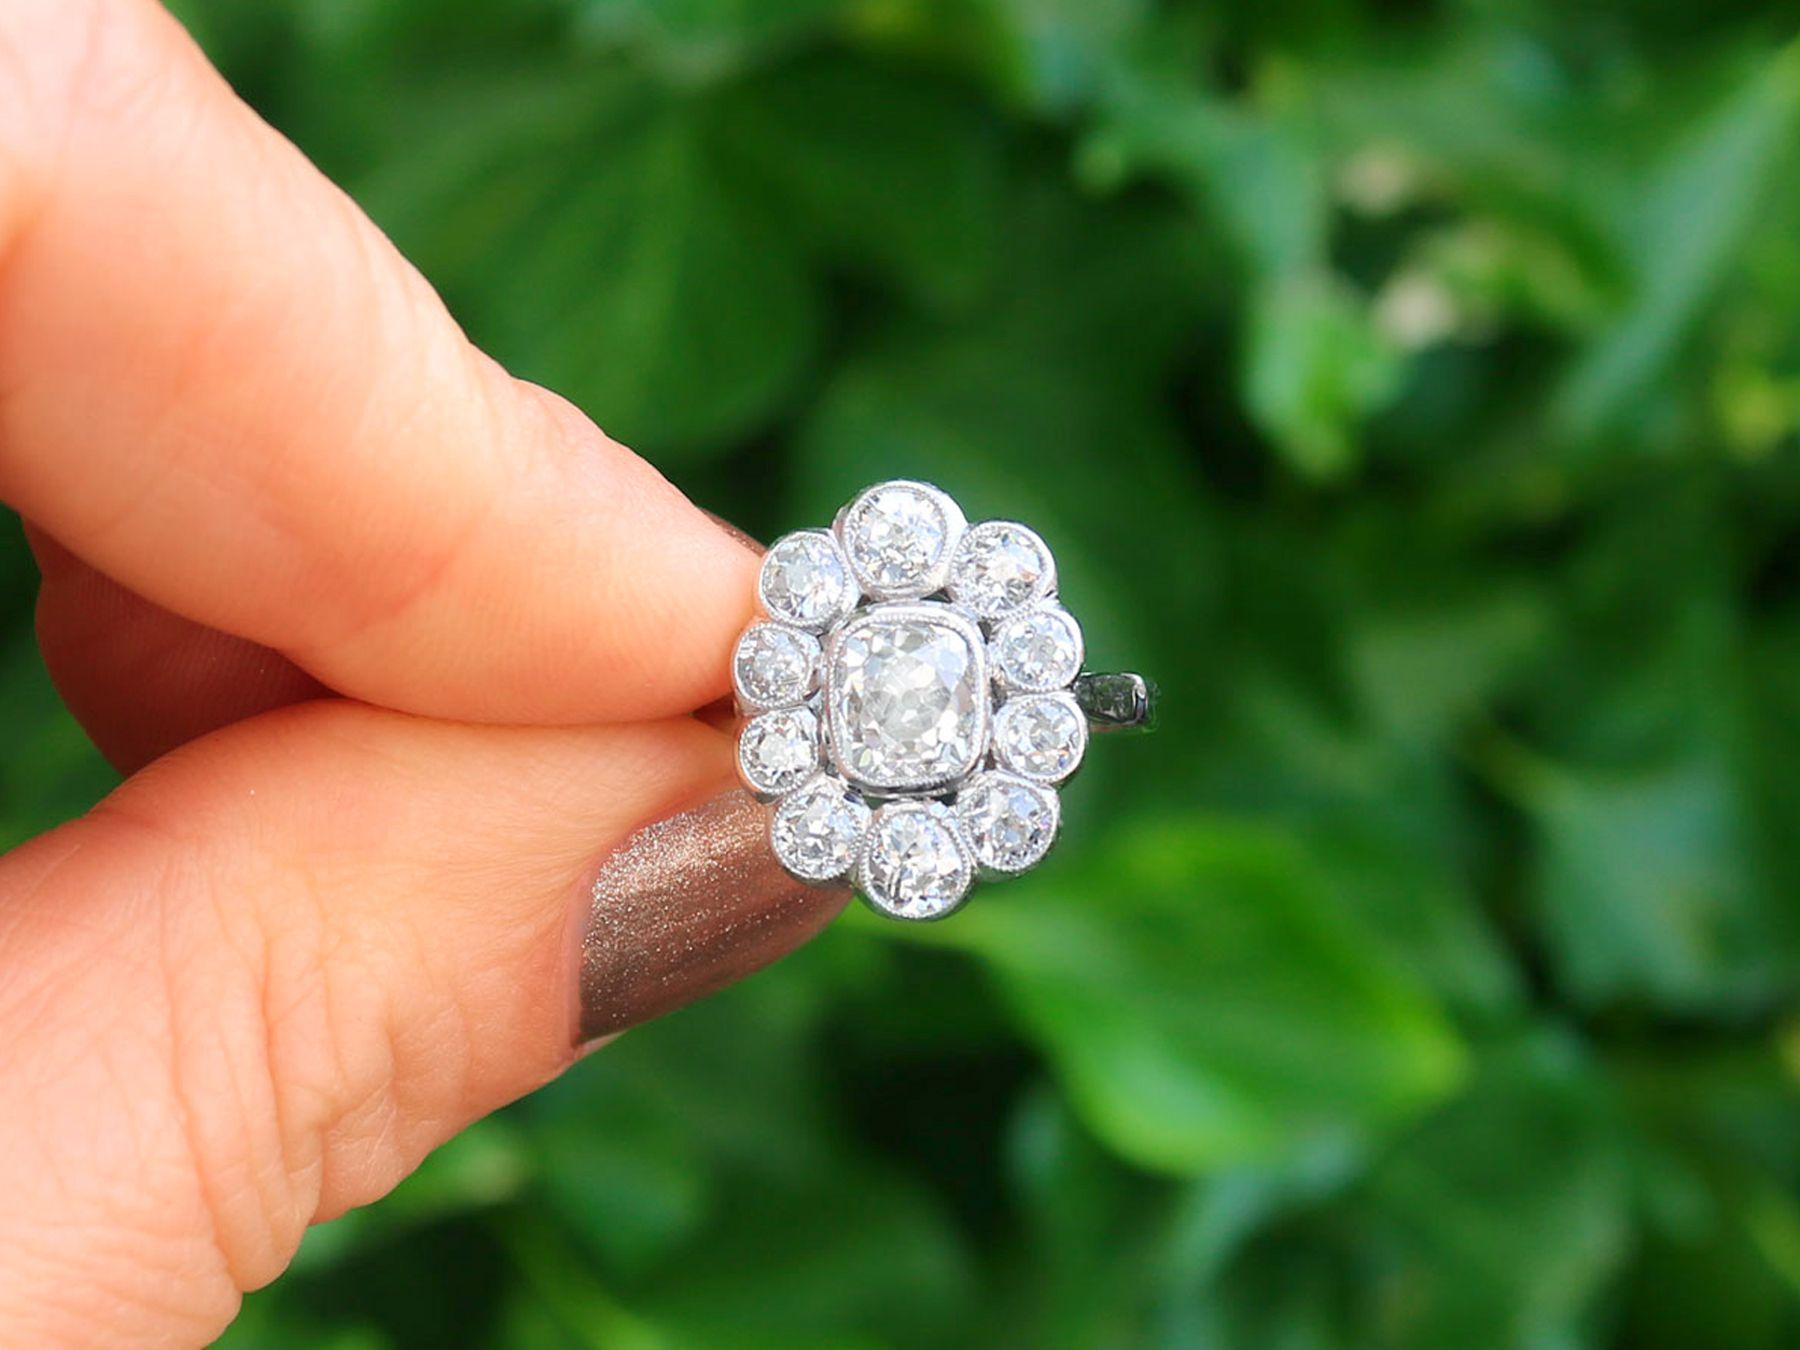 A stunning, fine and impressive antique and vintage 3.07 carat diamond and platinum dress / cocktail ring; part of our diverse diamond jewelry and estate jewelry collections.

Video: A video of this fine piece is available upon request.

This